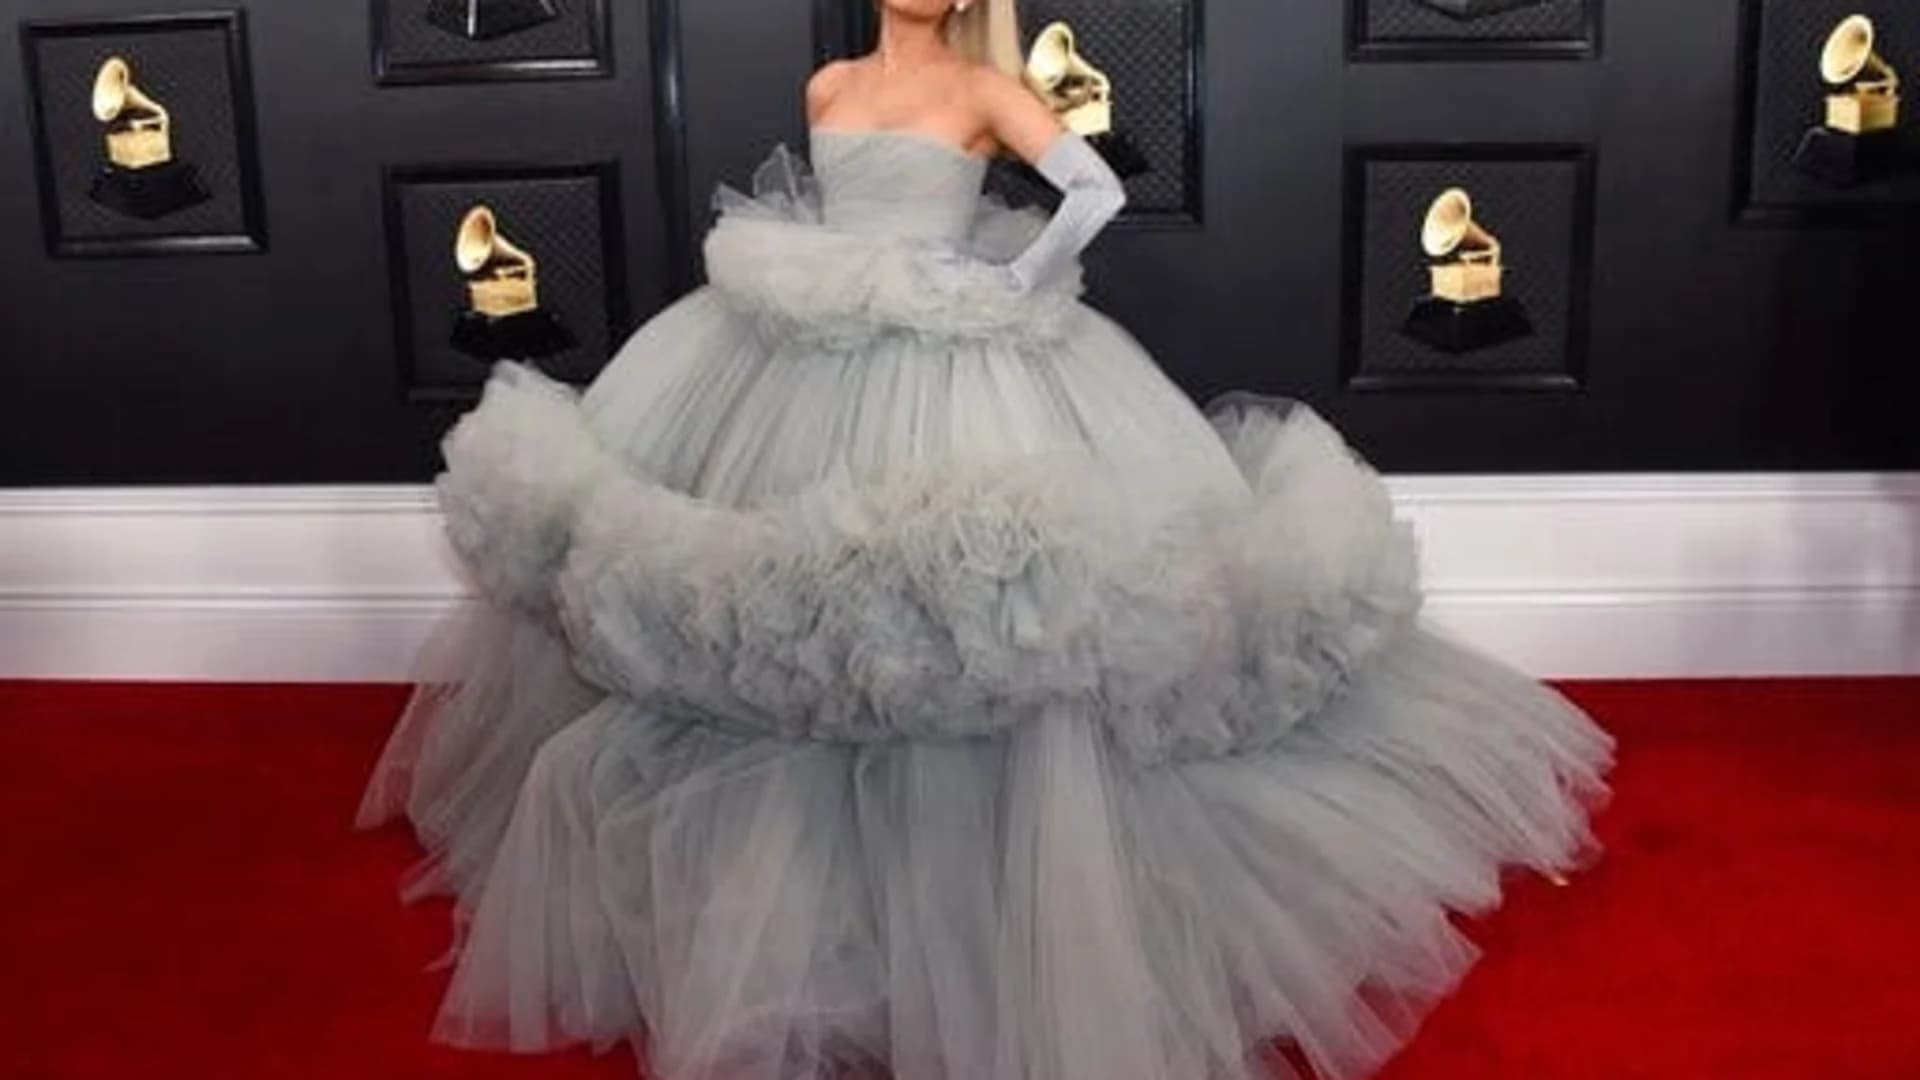 Sights and scenes from the 2020 Grammy Awards